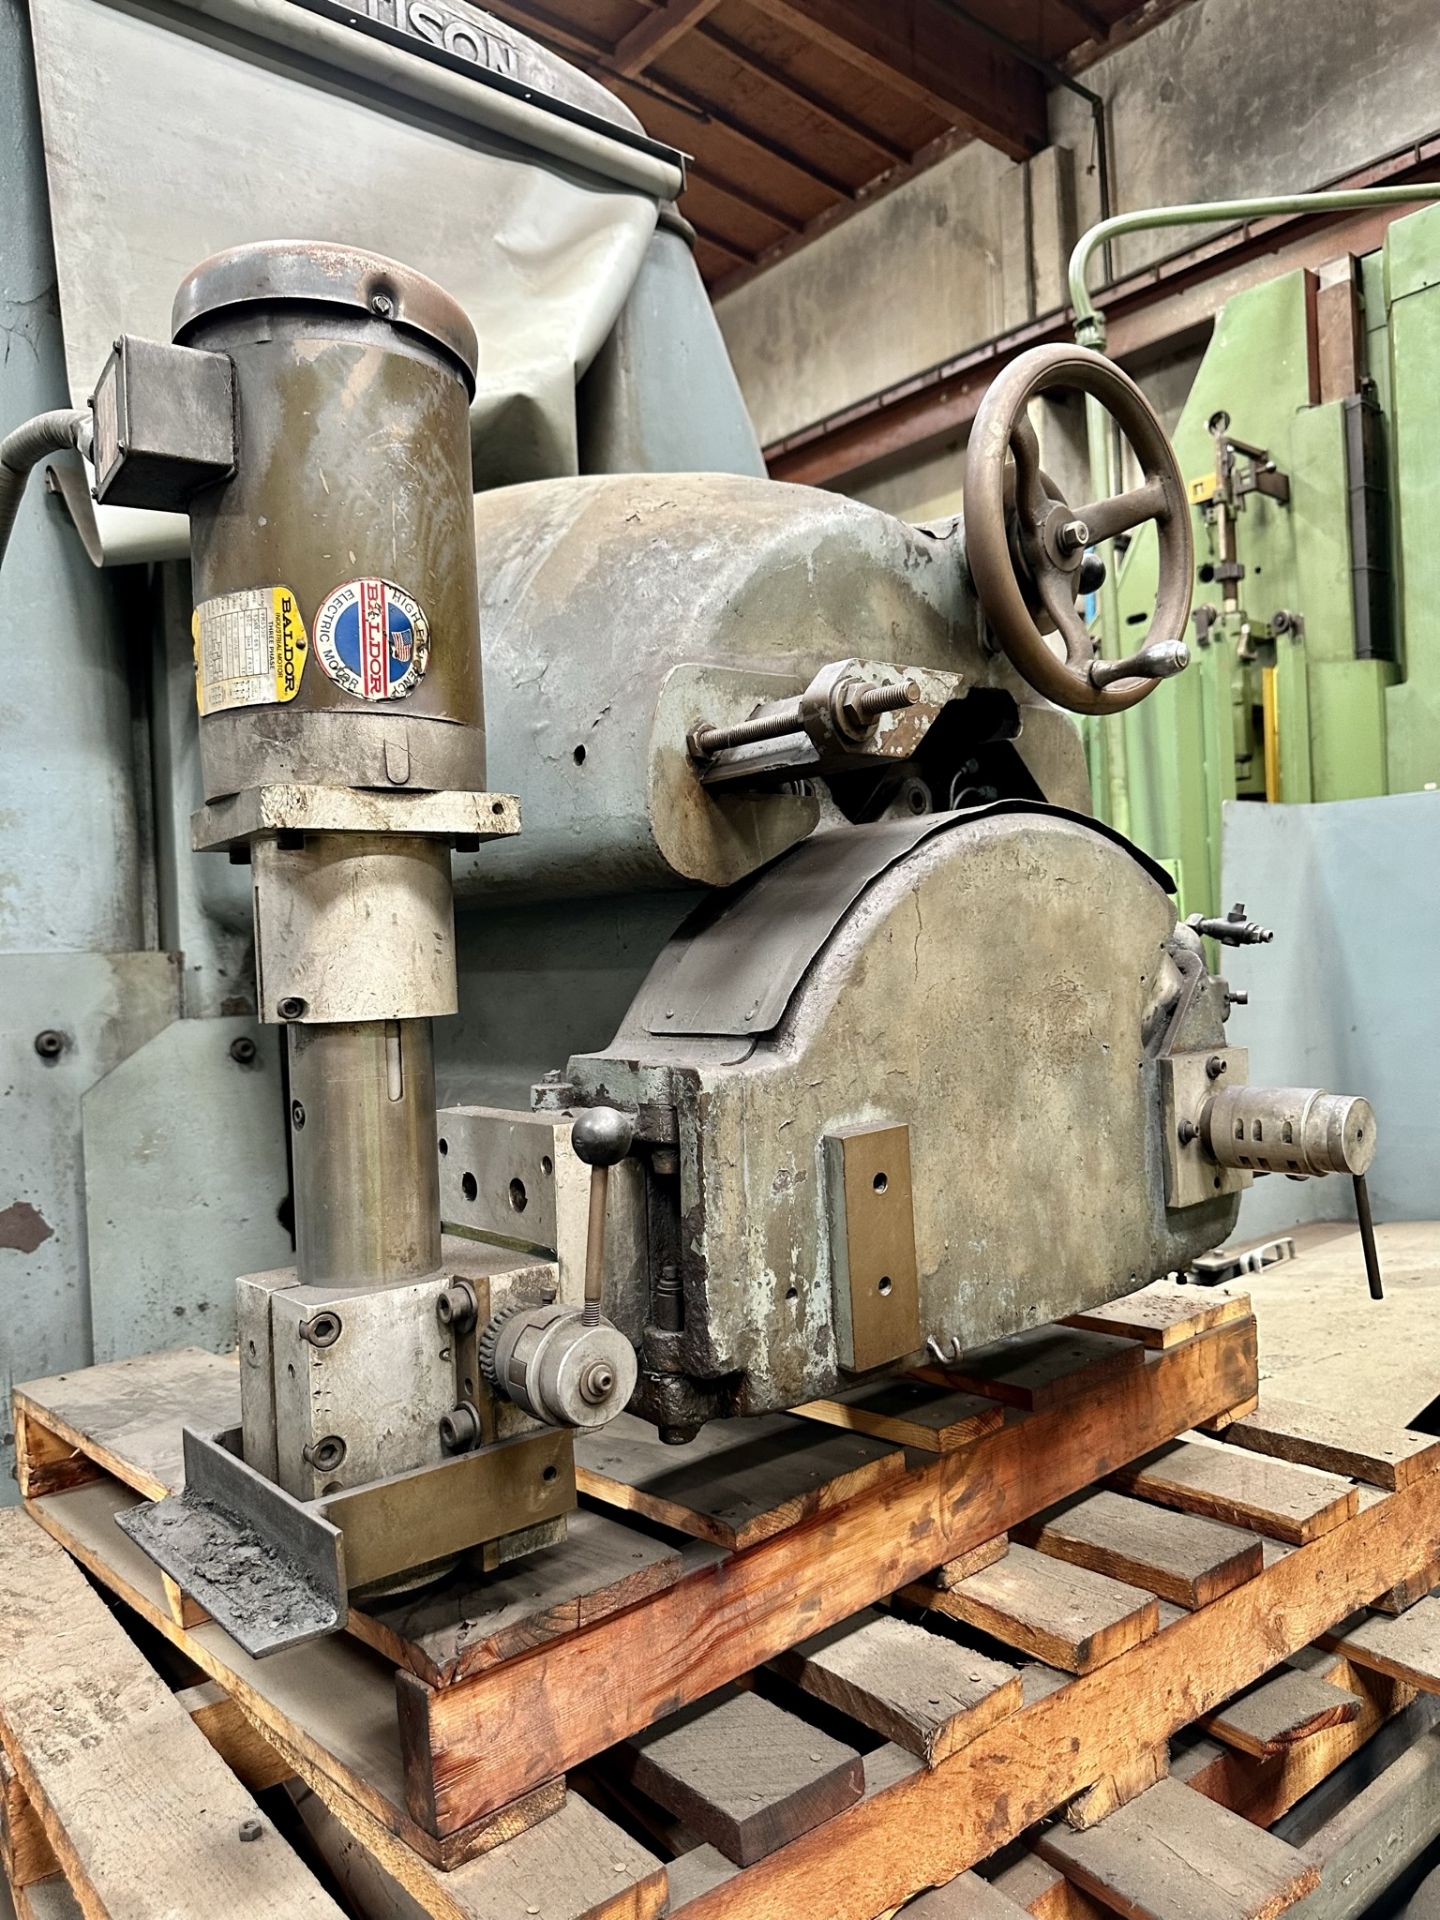 MATTISON SURFACE GRINDER, 104" X 36" WORKING SURFACE, USED, (LOCATION: SANTA FE SPRINGS, CA) - Image 8 of 10